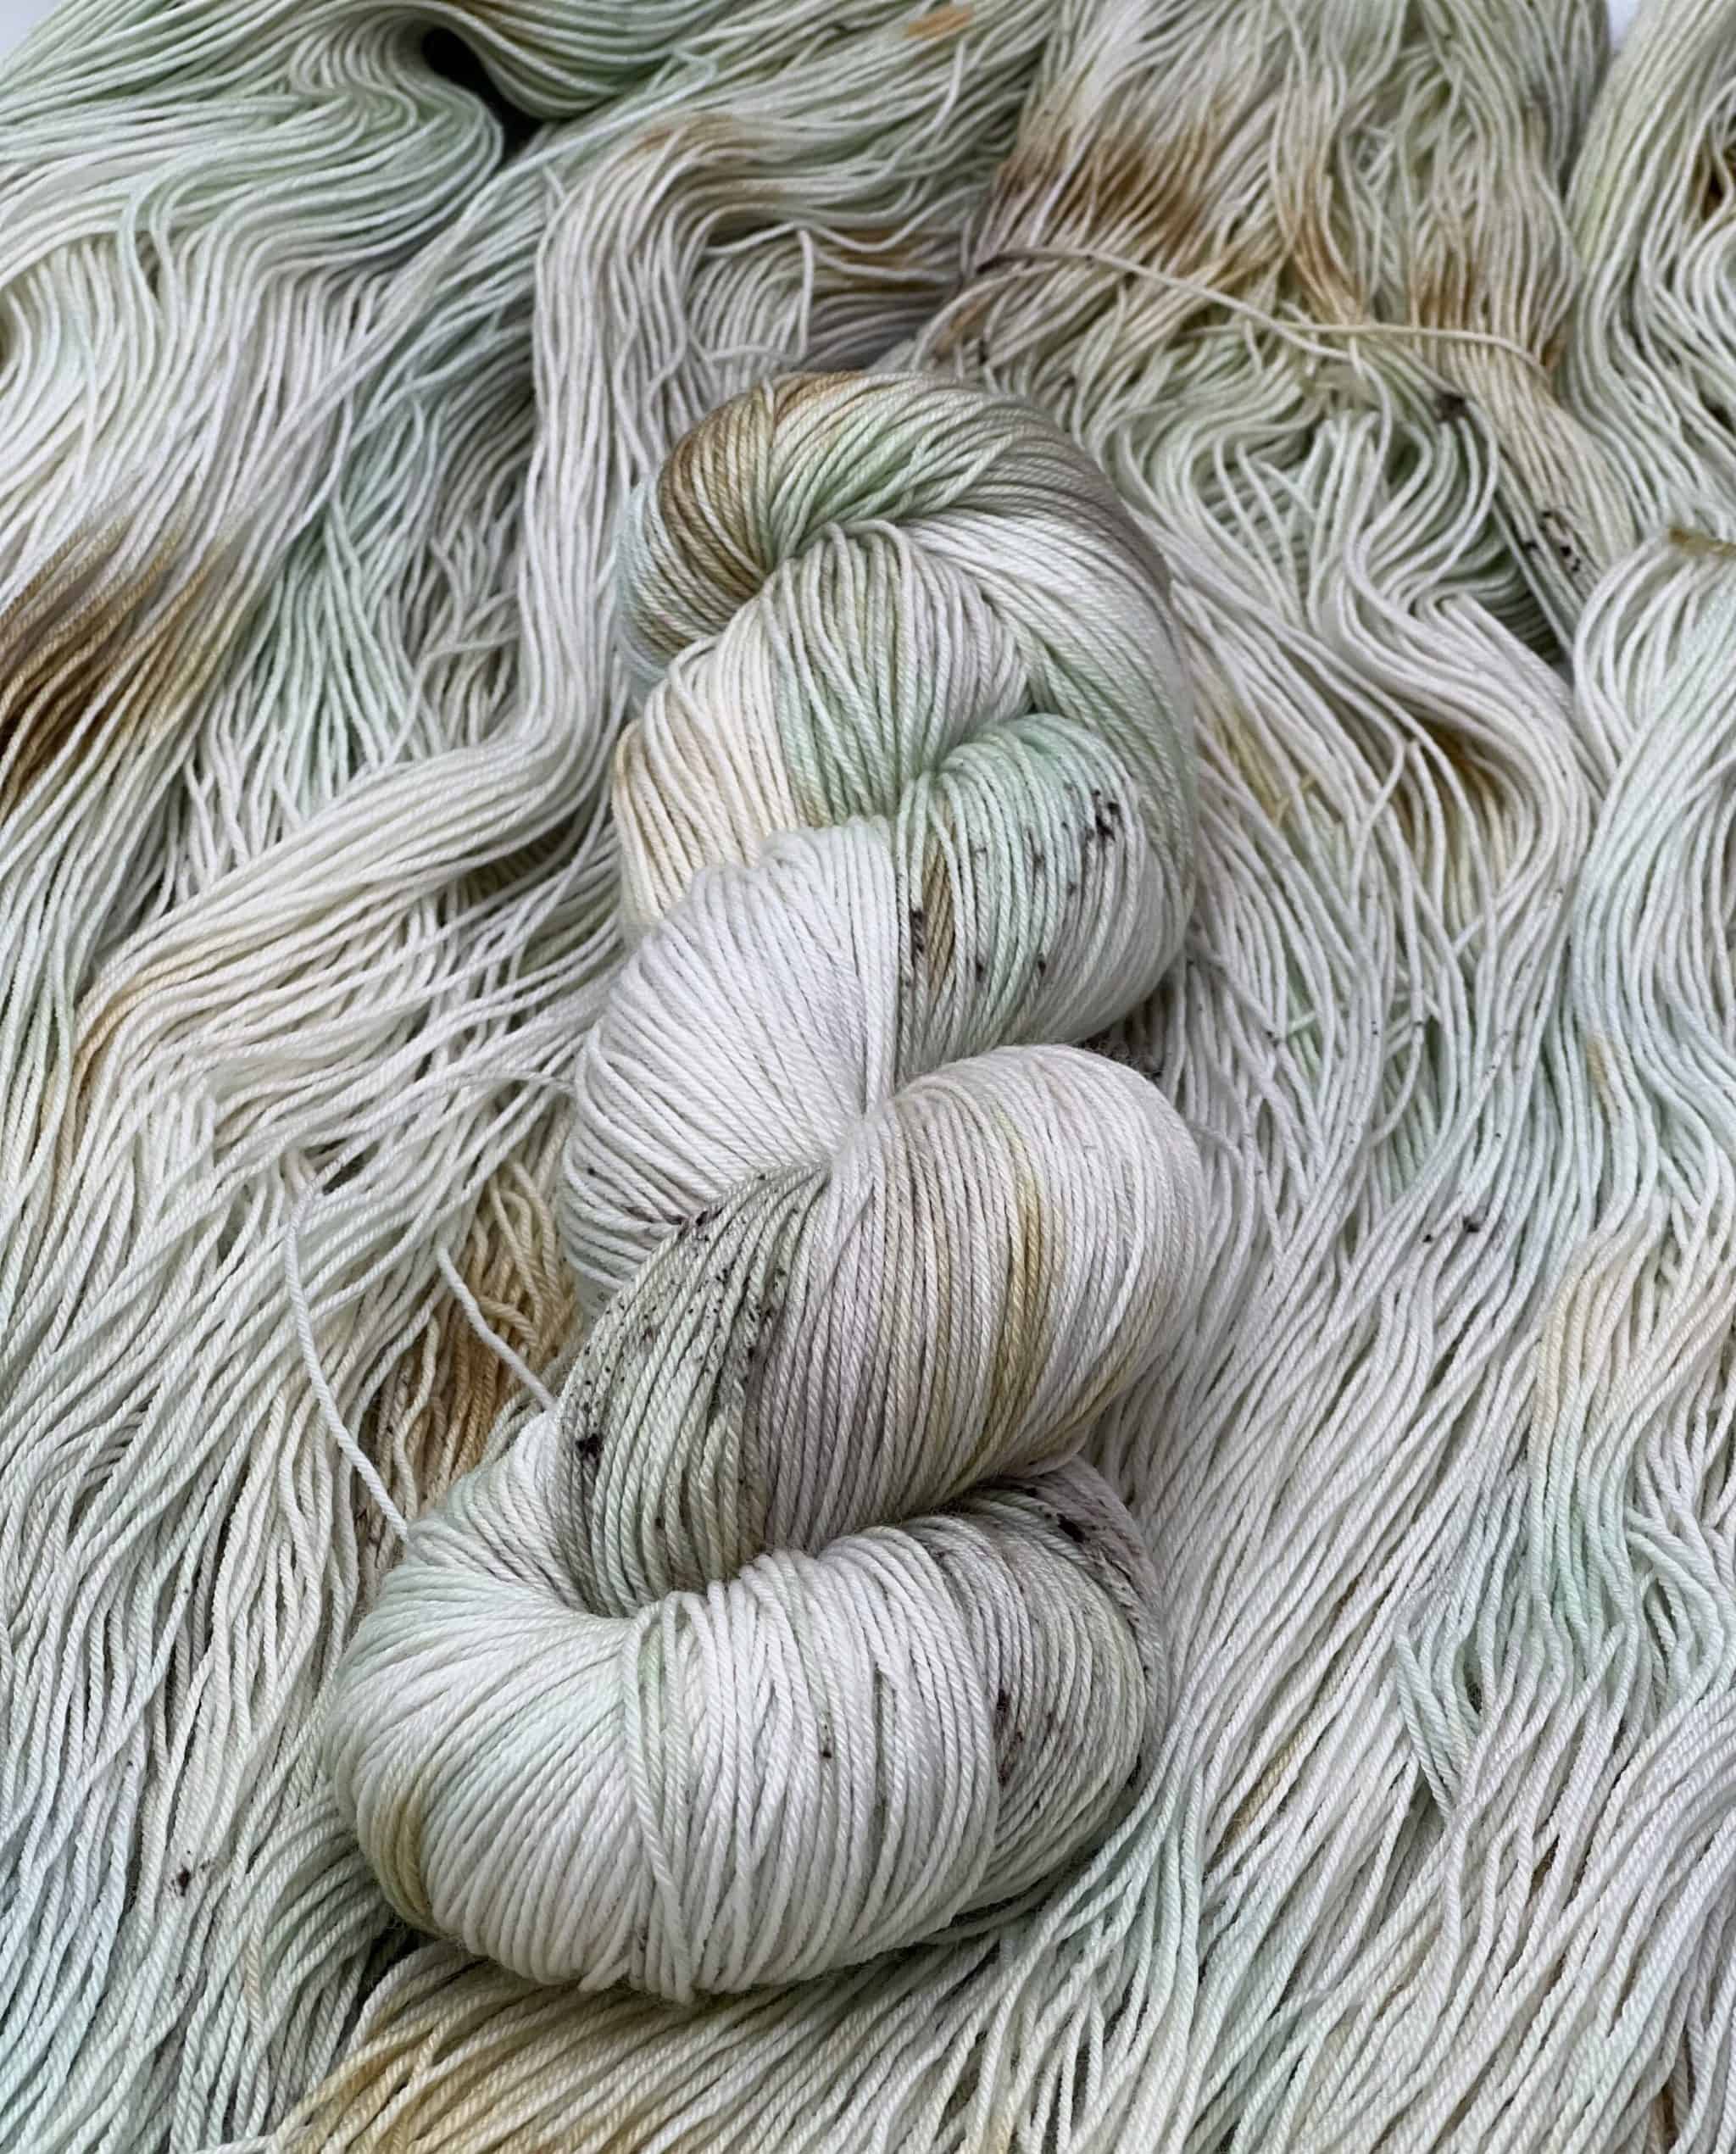 A very pale green and orange brown skein of yarn.